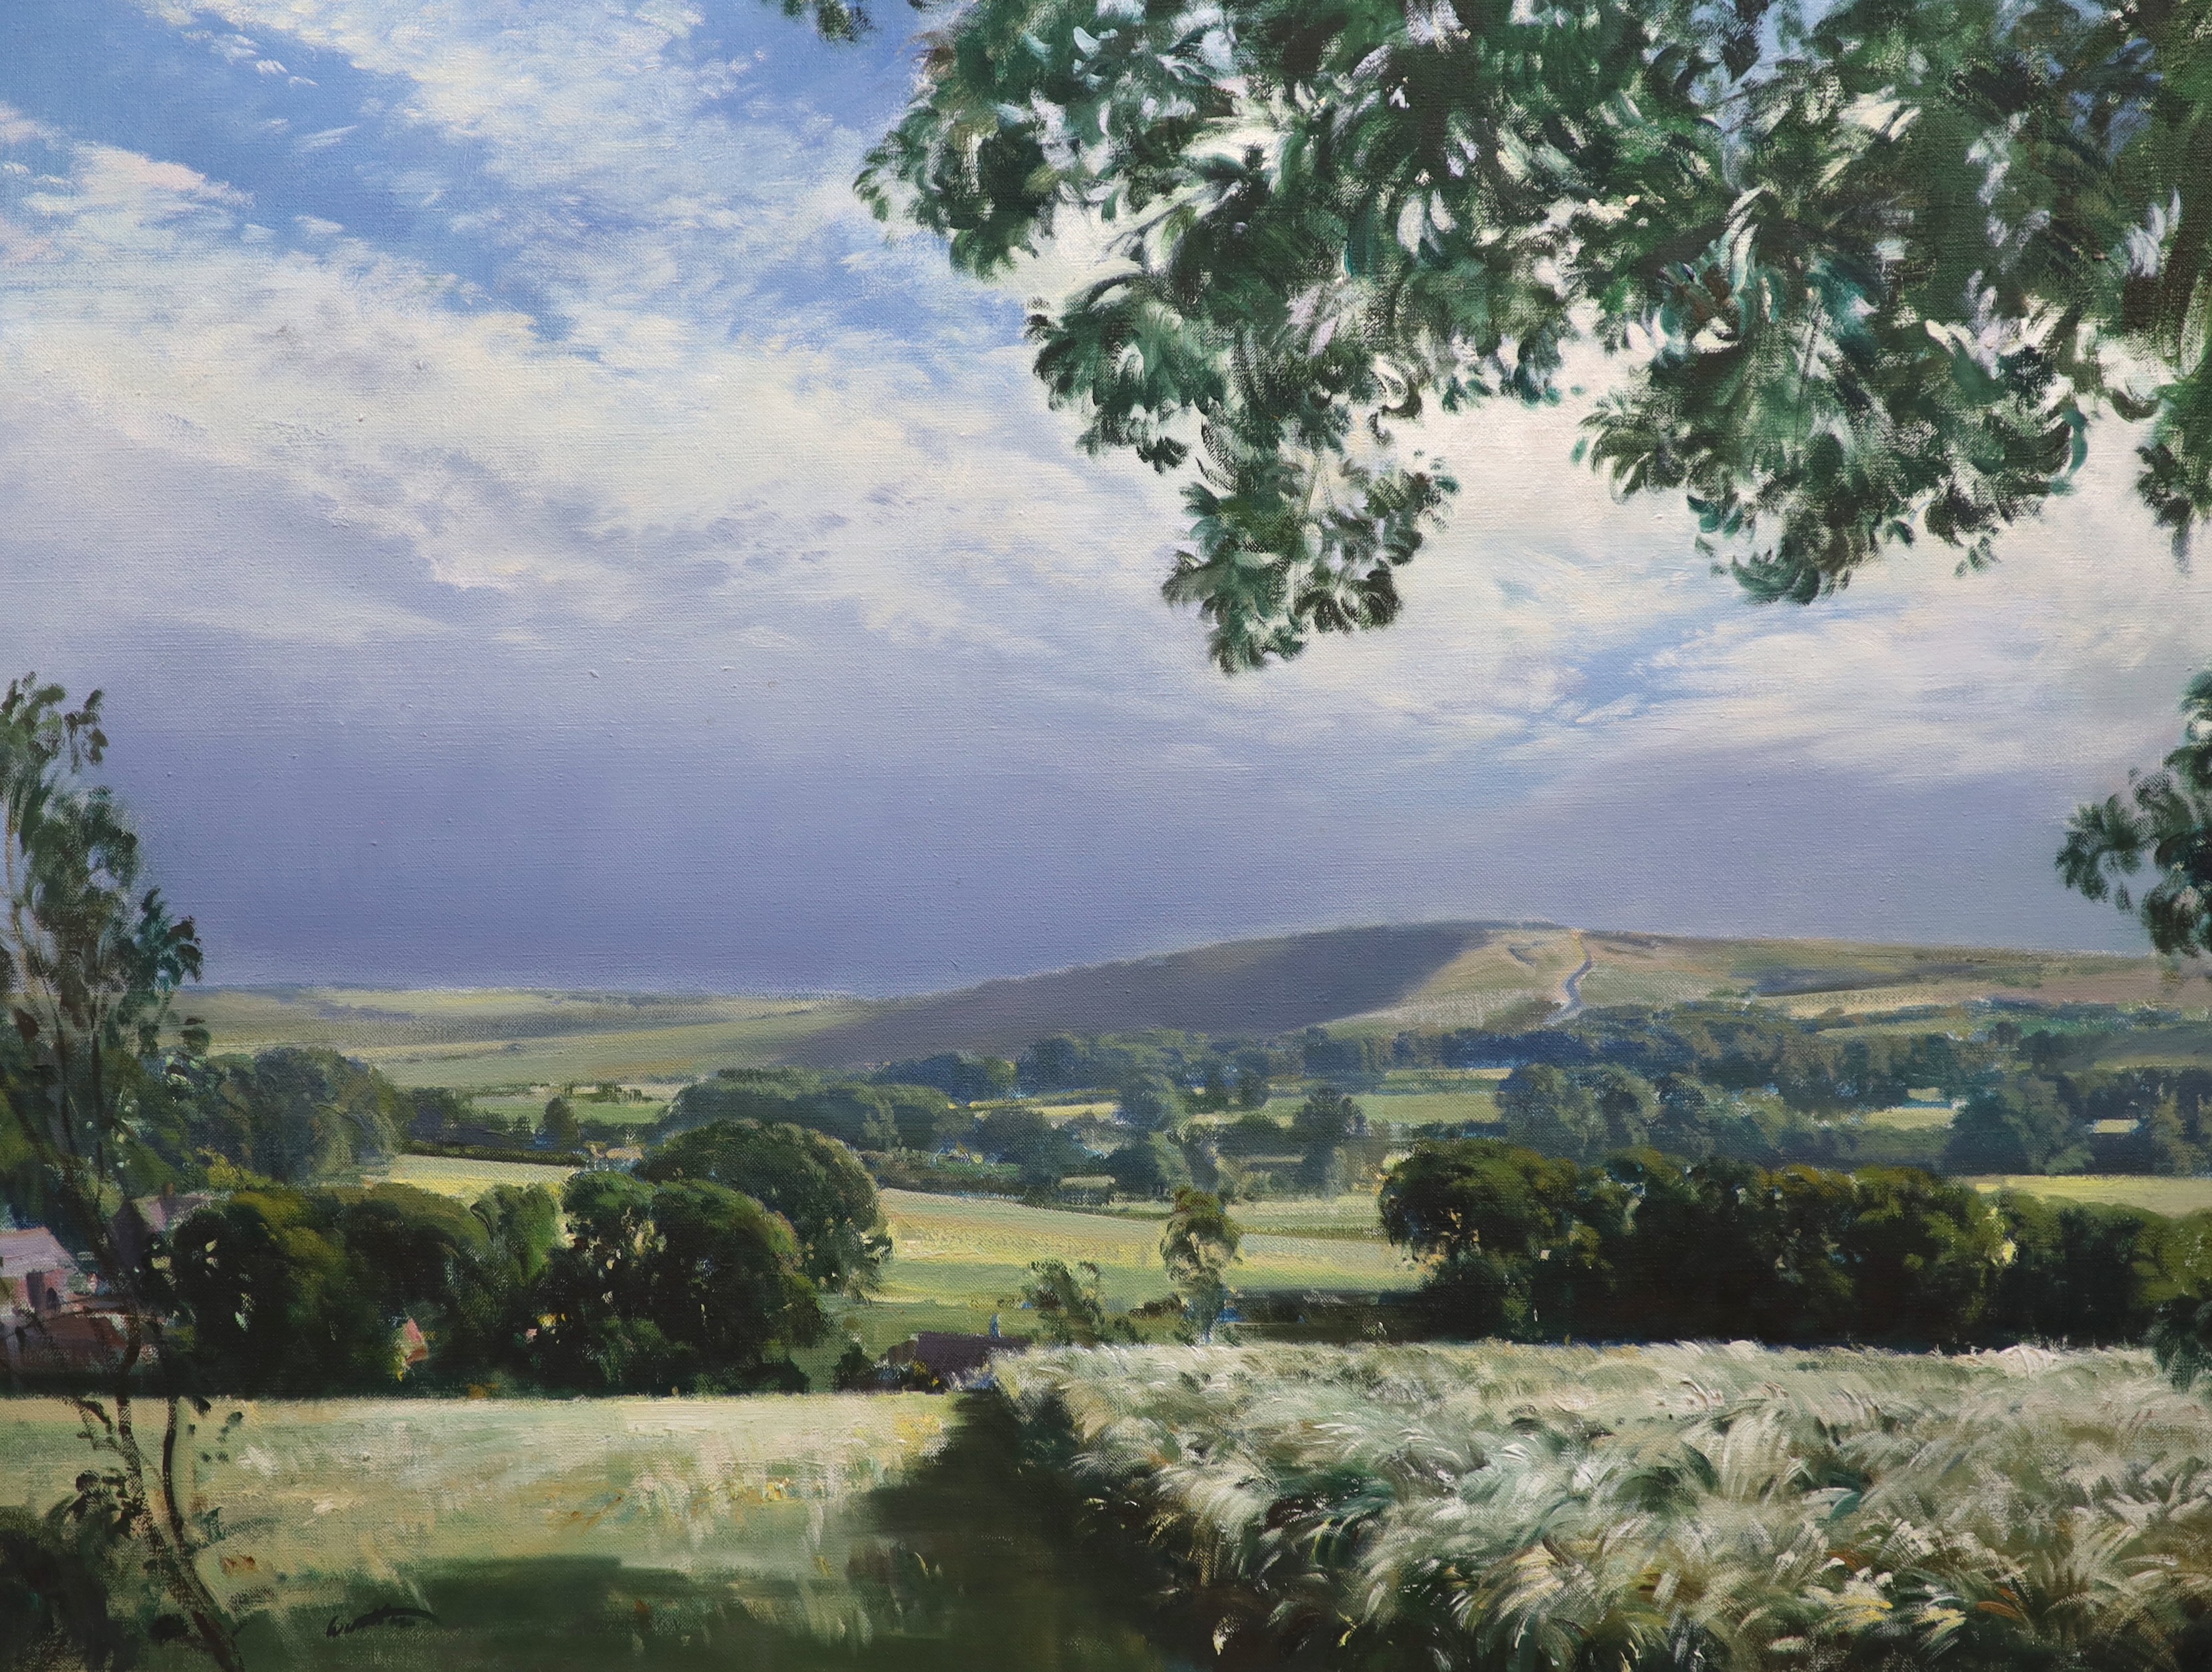 Frank Wootton (British, 1914-1988), 'Sunshine after rain, High Roven from Lullington Hill', oil on canvas, 56.5 x 74.5cm